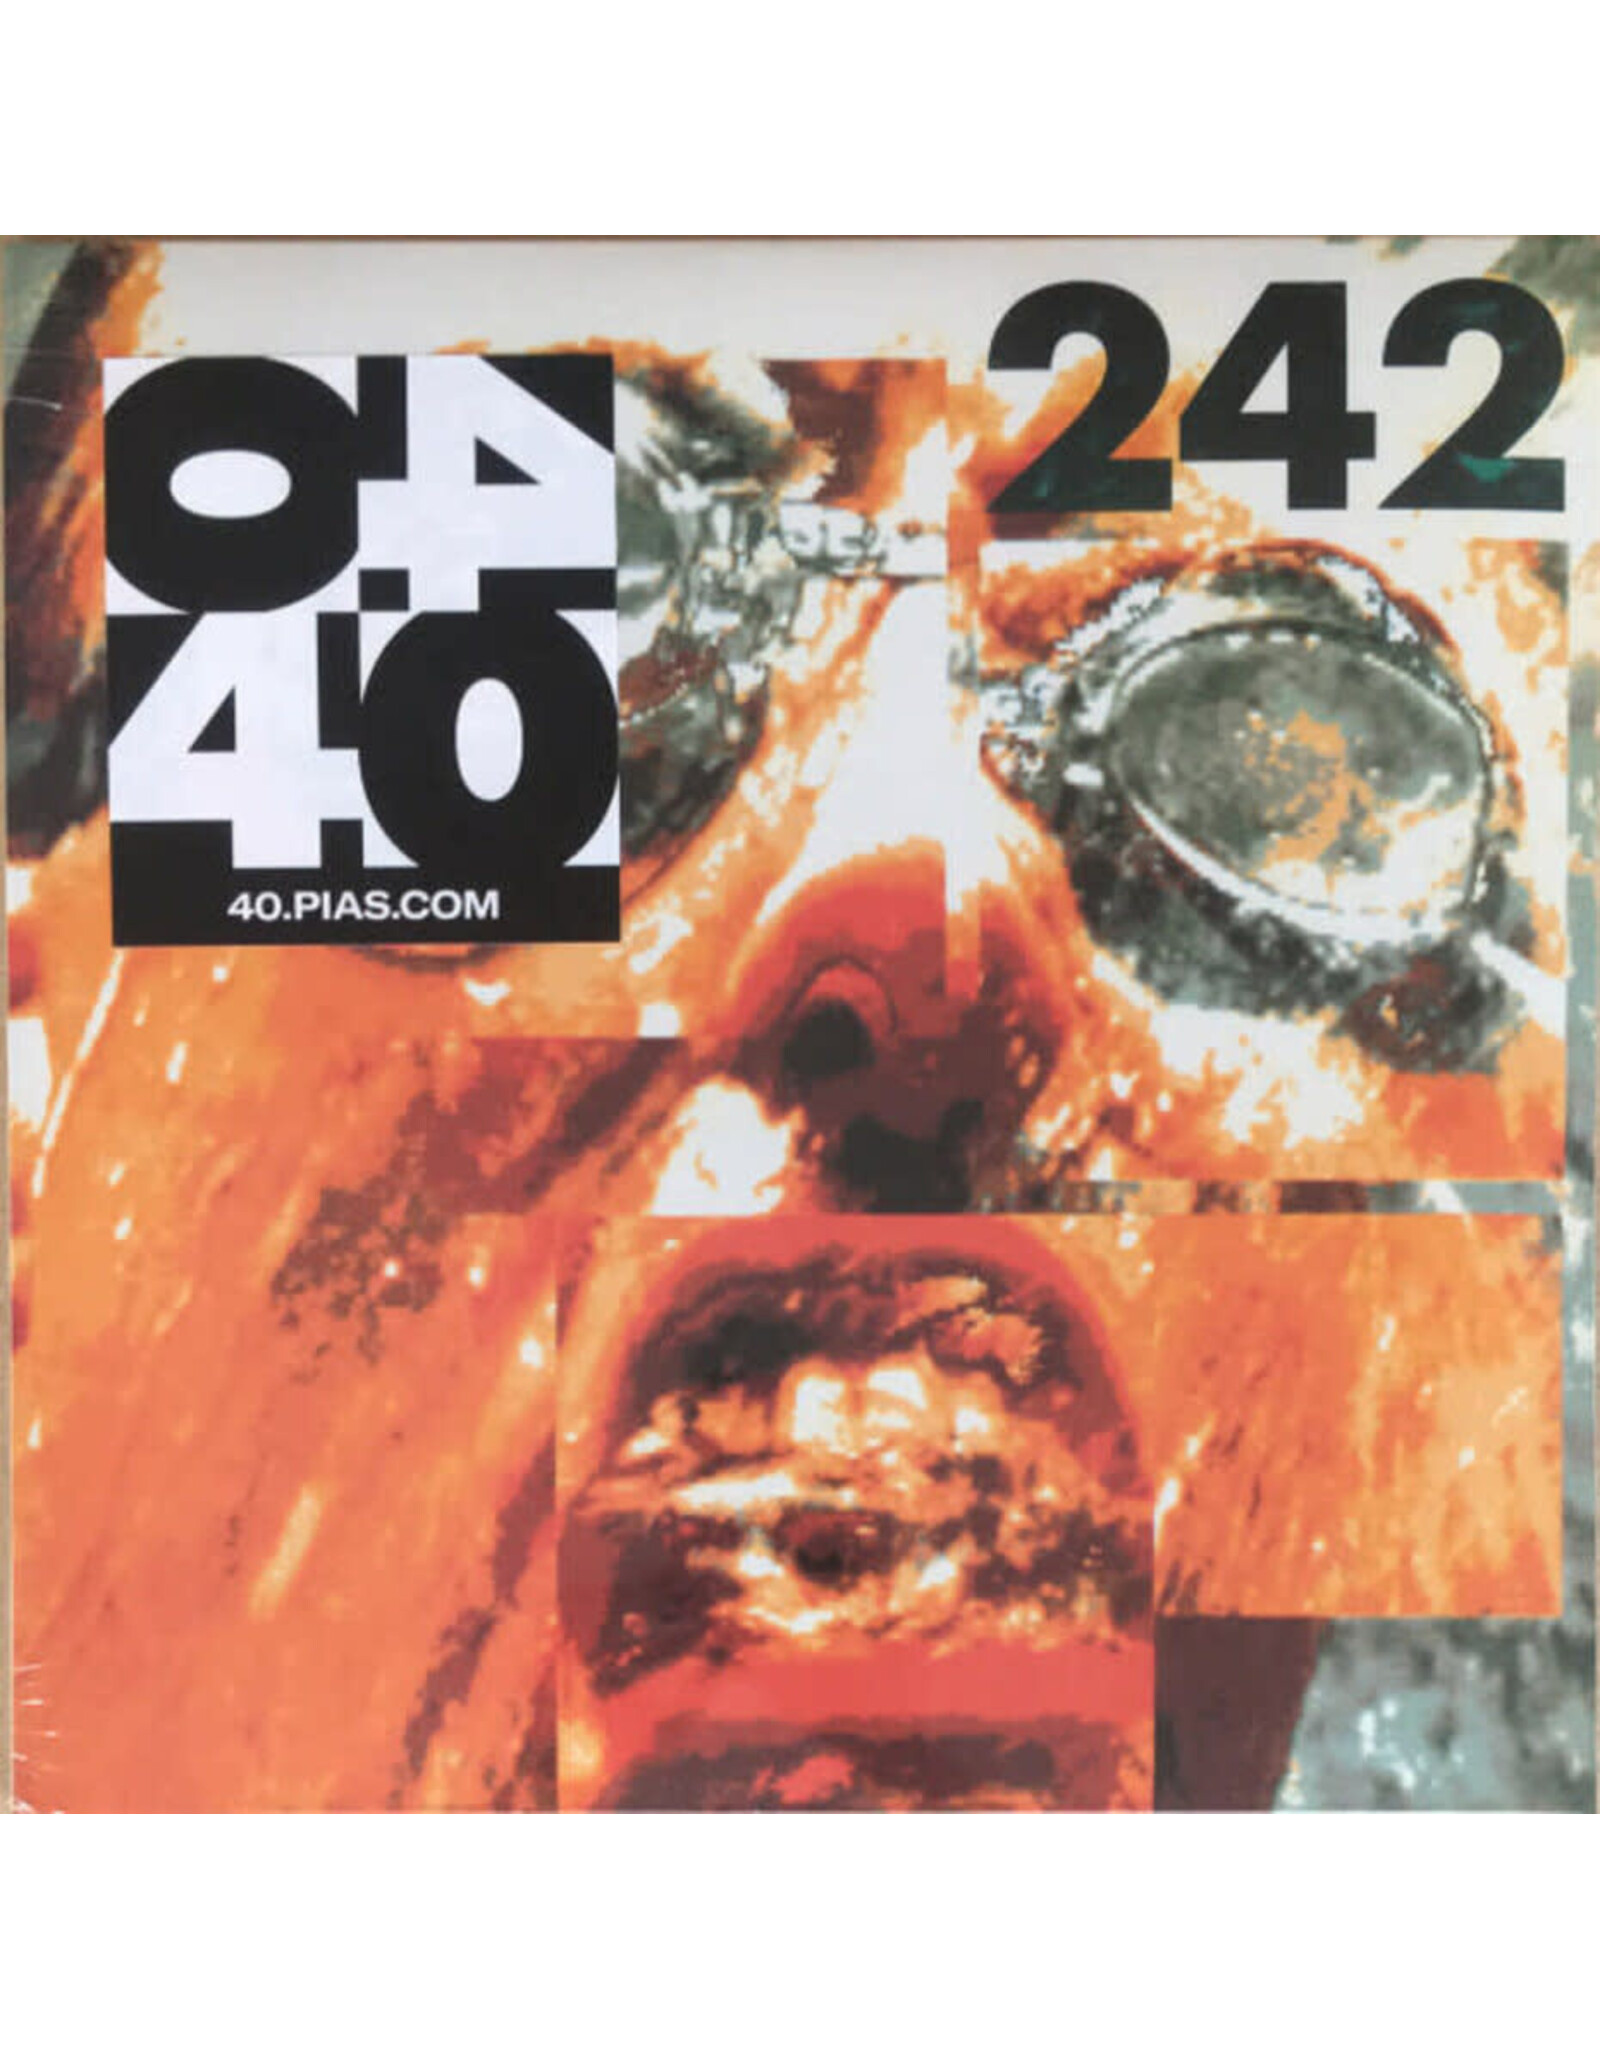 PIAS Front 242: Tyranny (For You) LP